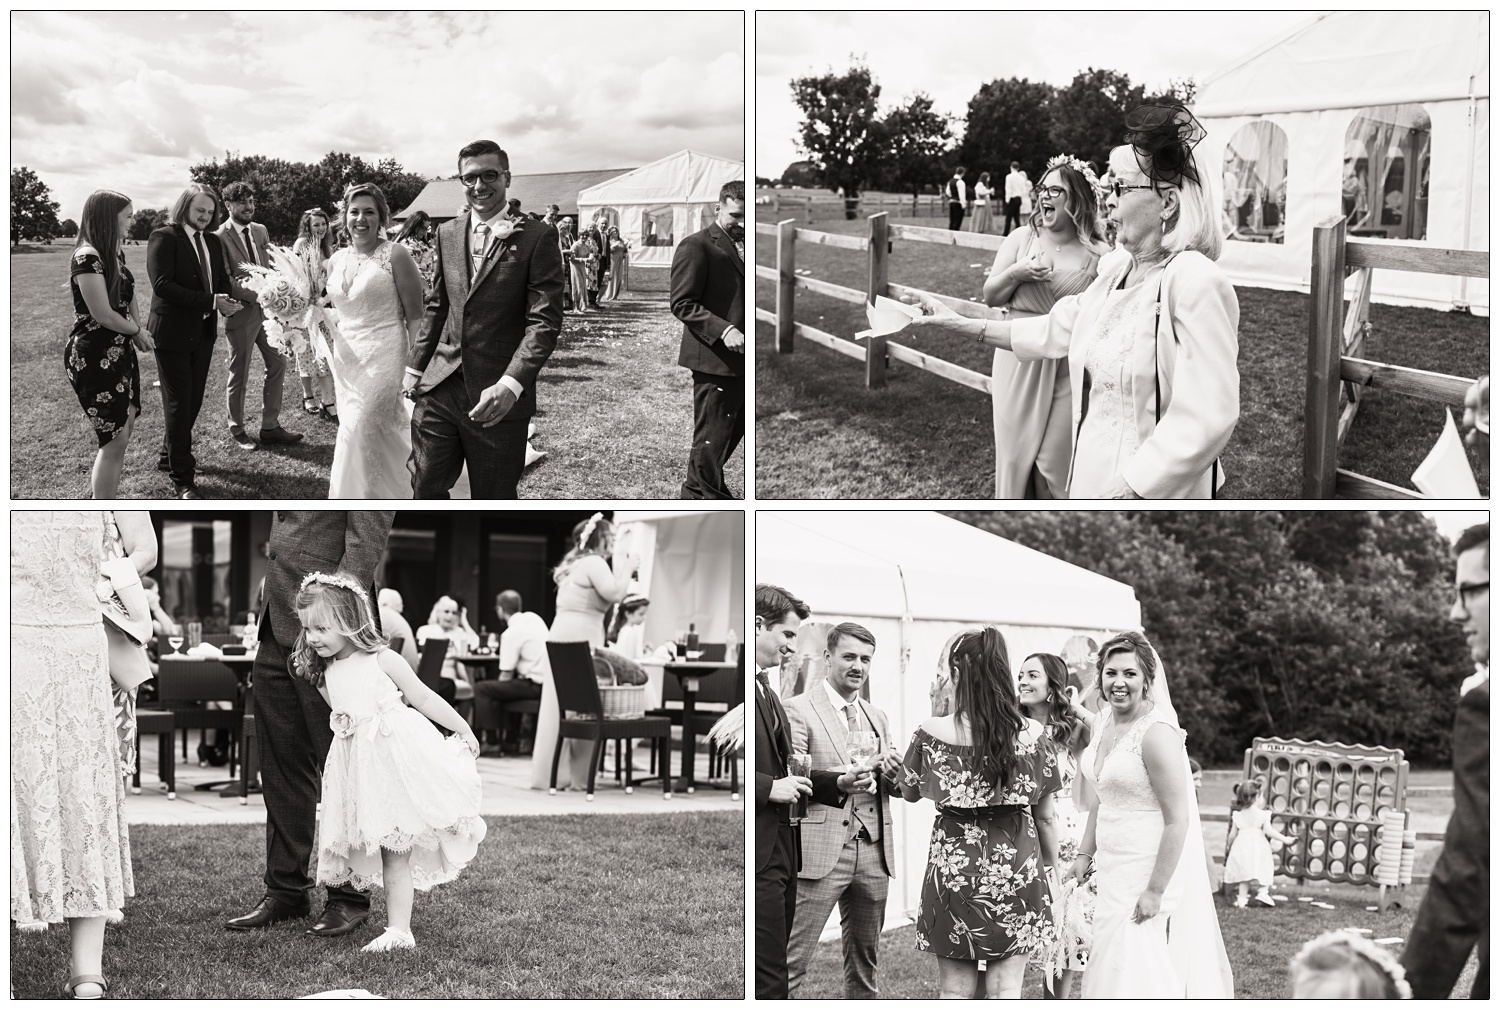 Black and white candid photographs from a wedding near Ipswich.